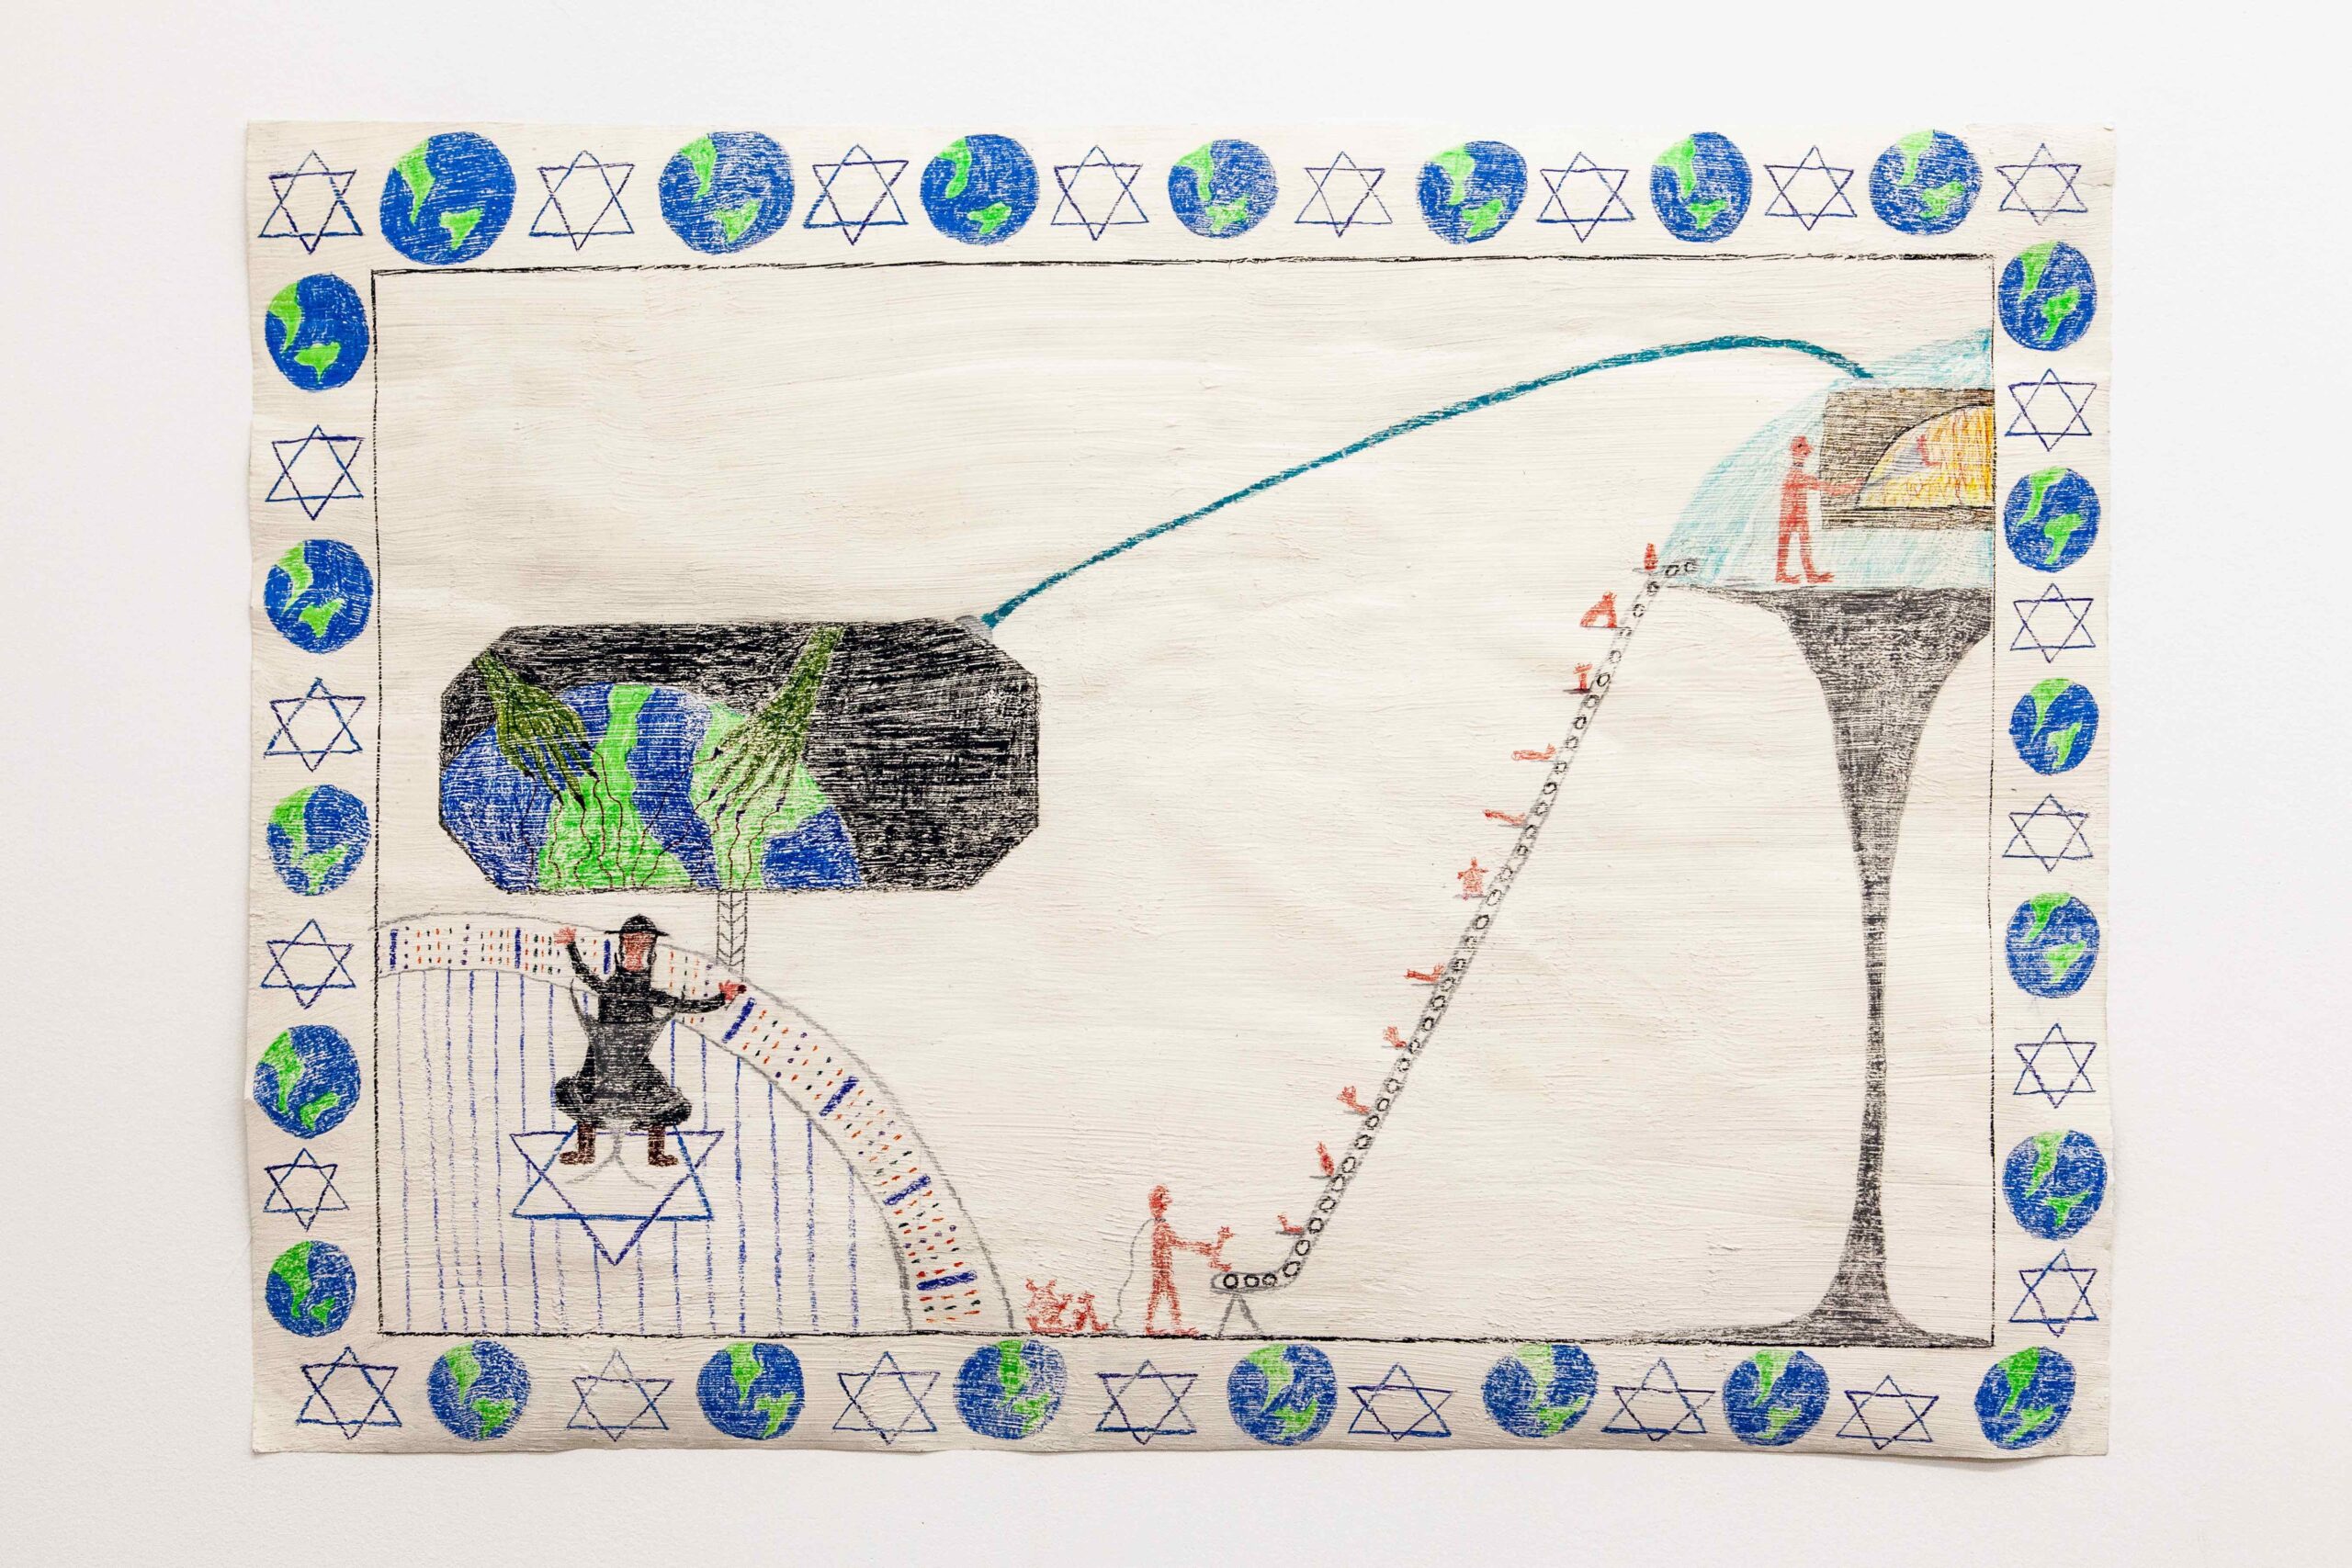 Conspiracy series: World domination Crayon, Acrystal on Paper, 85 x 60 cm 2021